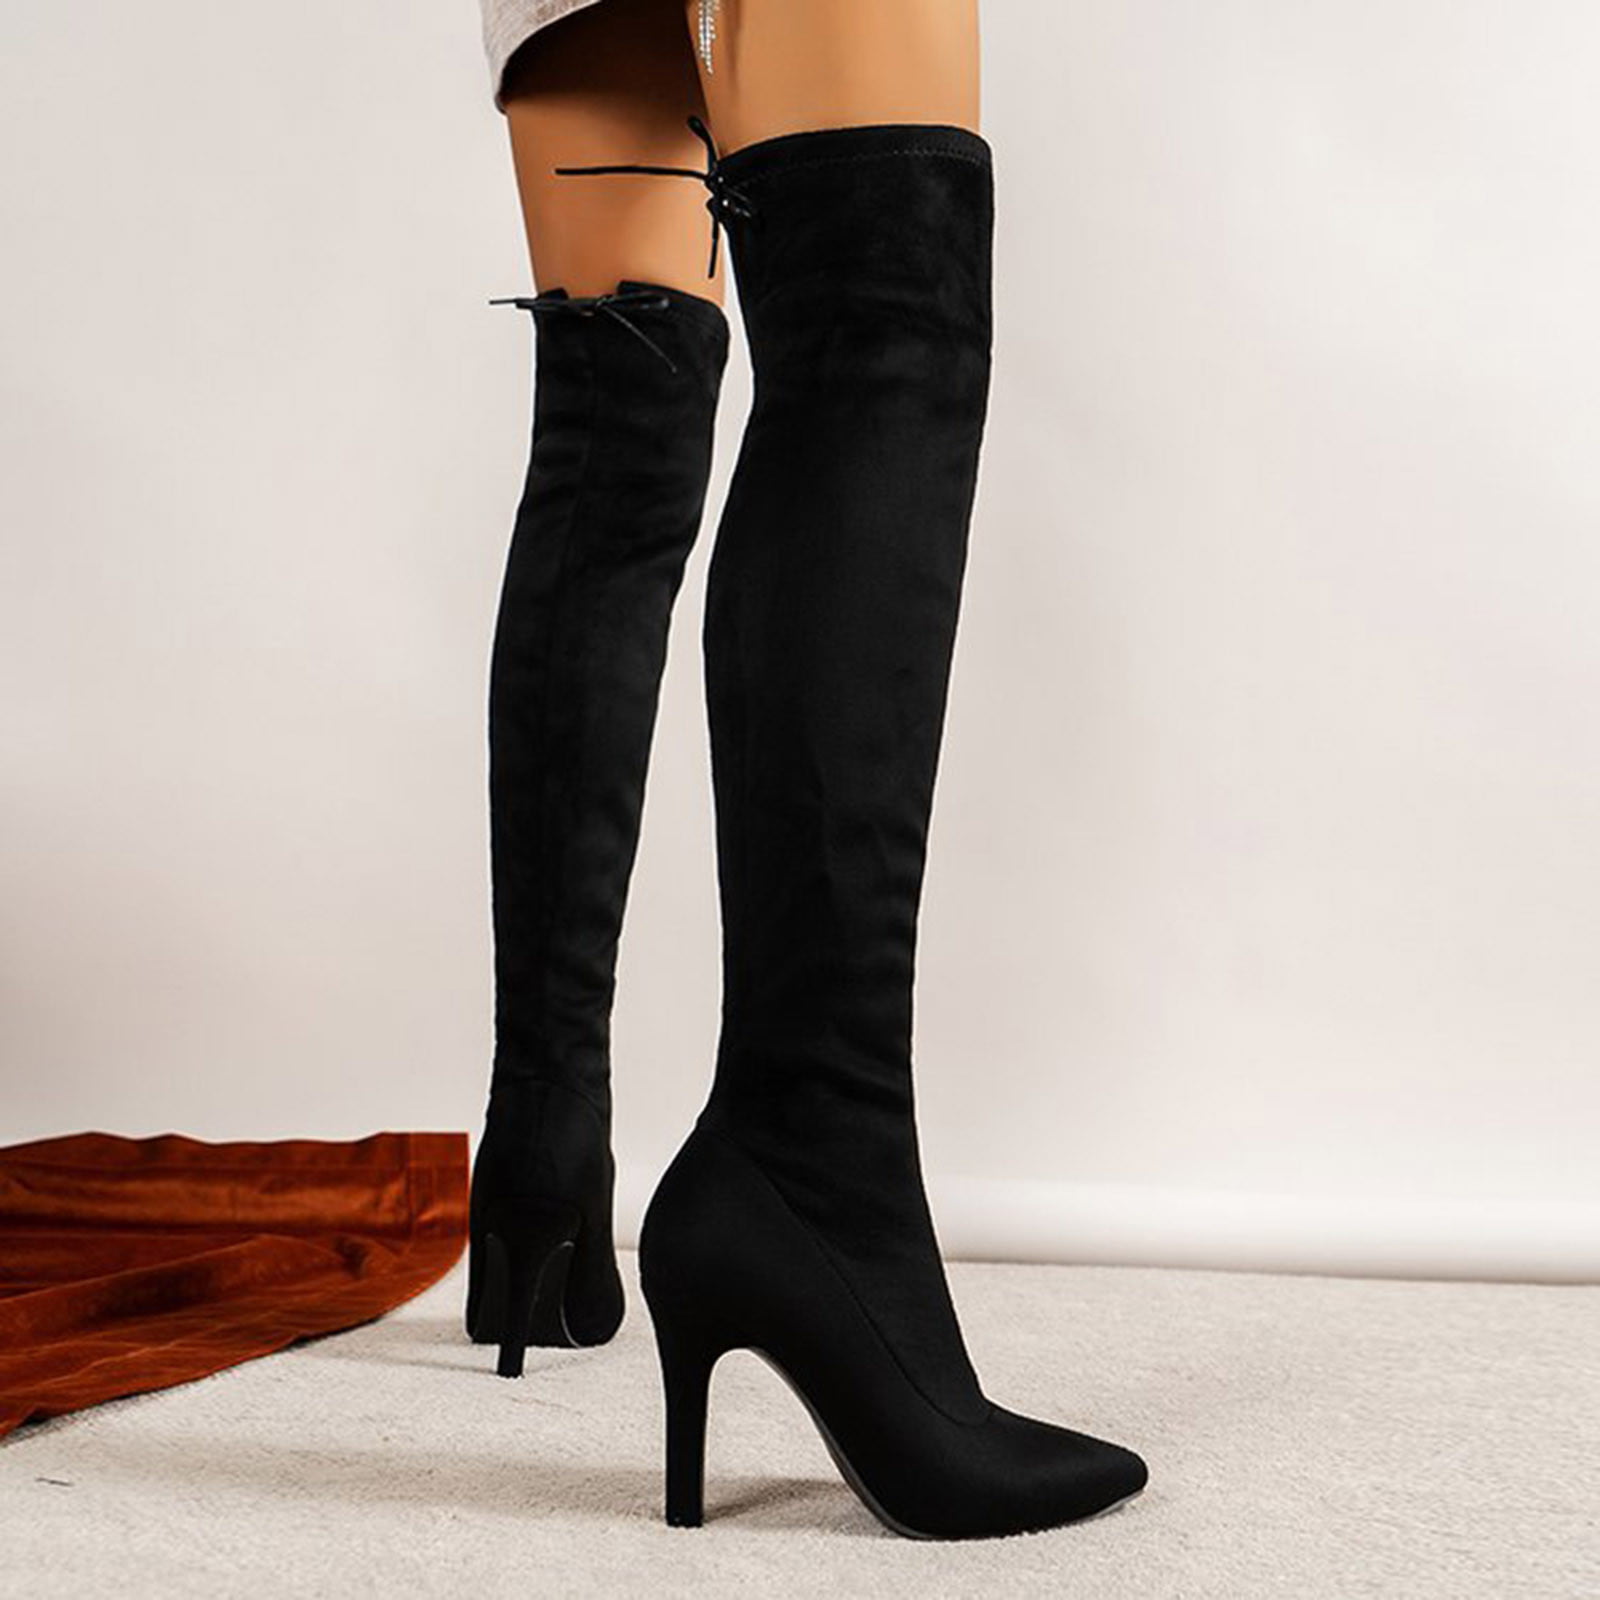 Buy DREAM PAIRS Women's Over The Knee Thigh High Chunky Heel Boots Long  Stretch Sexy Fall Boots, Black-laurence, 5 at Amazon.in